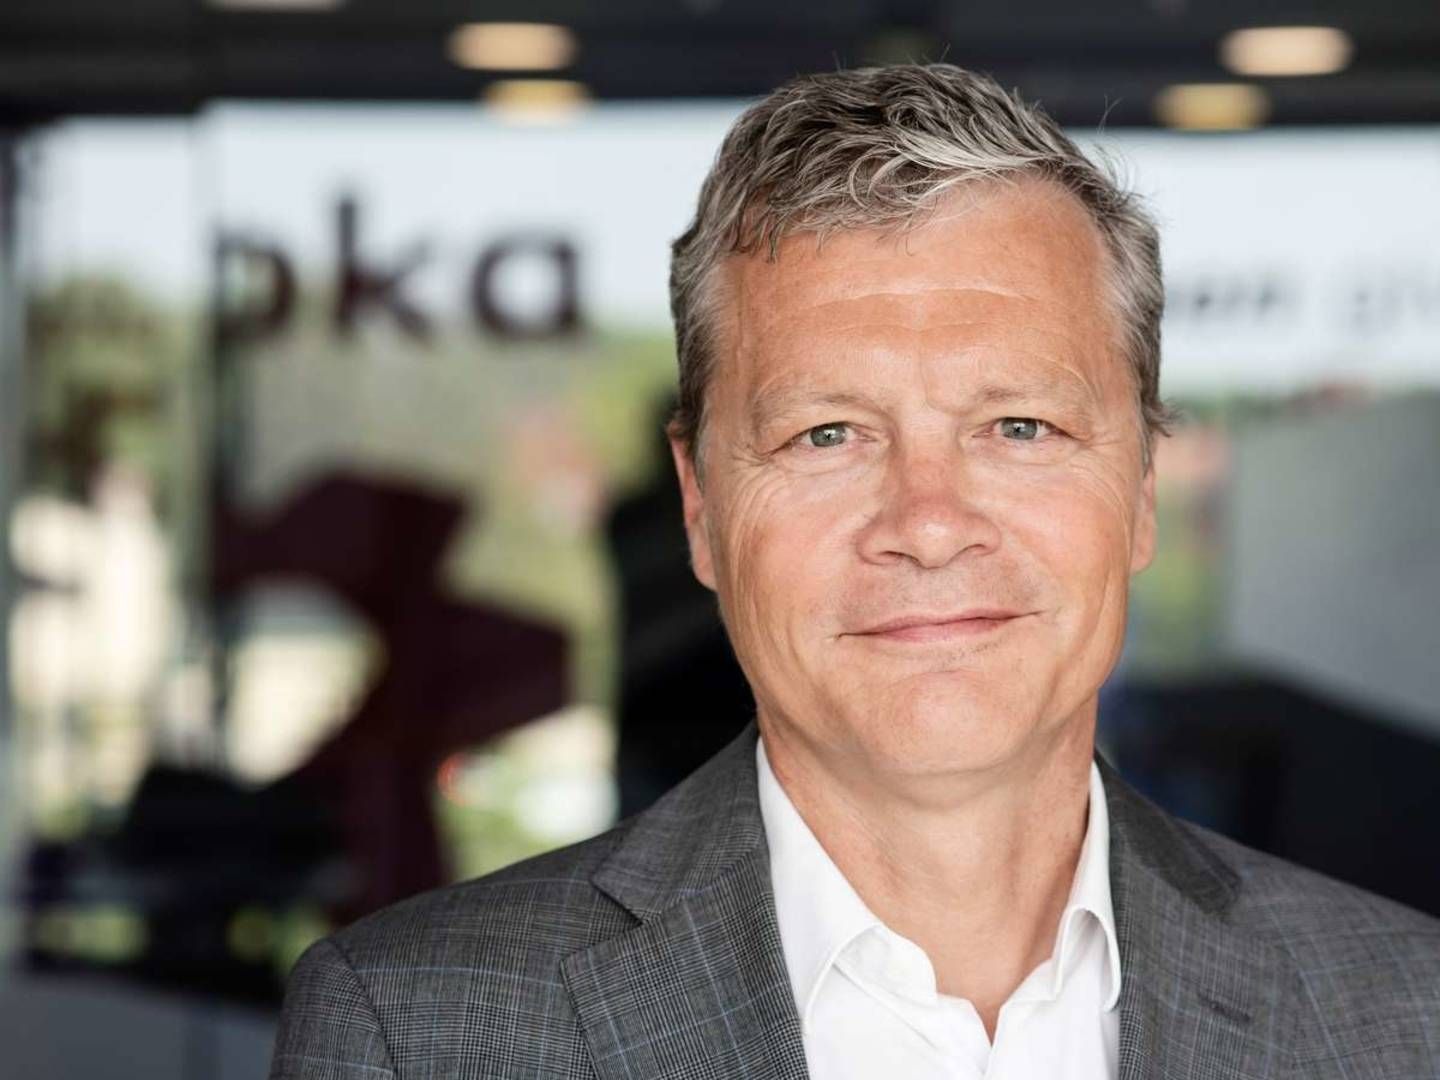 Michael Nellemann Pedersen, CIO at PKA, hopes for the chance to invest in cooperation with the Danish state's new green fund. | Photo: PR/ PKA